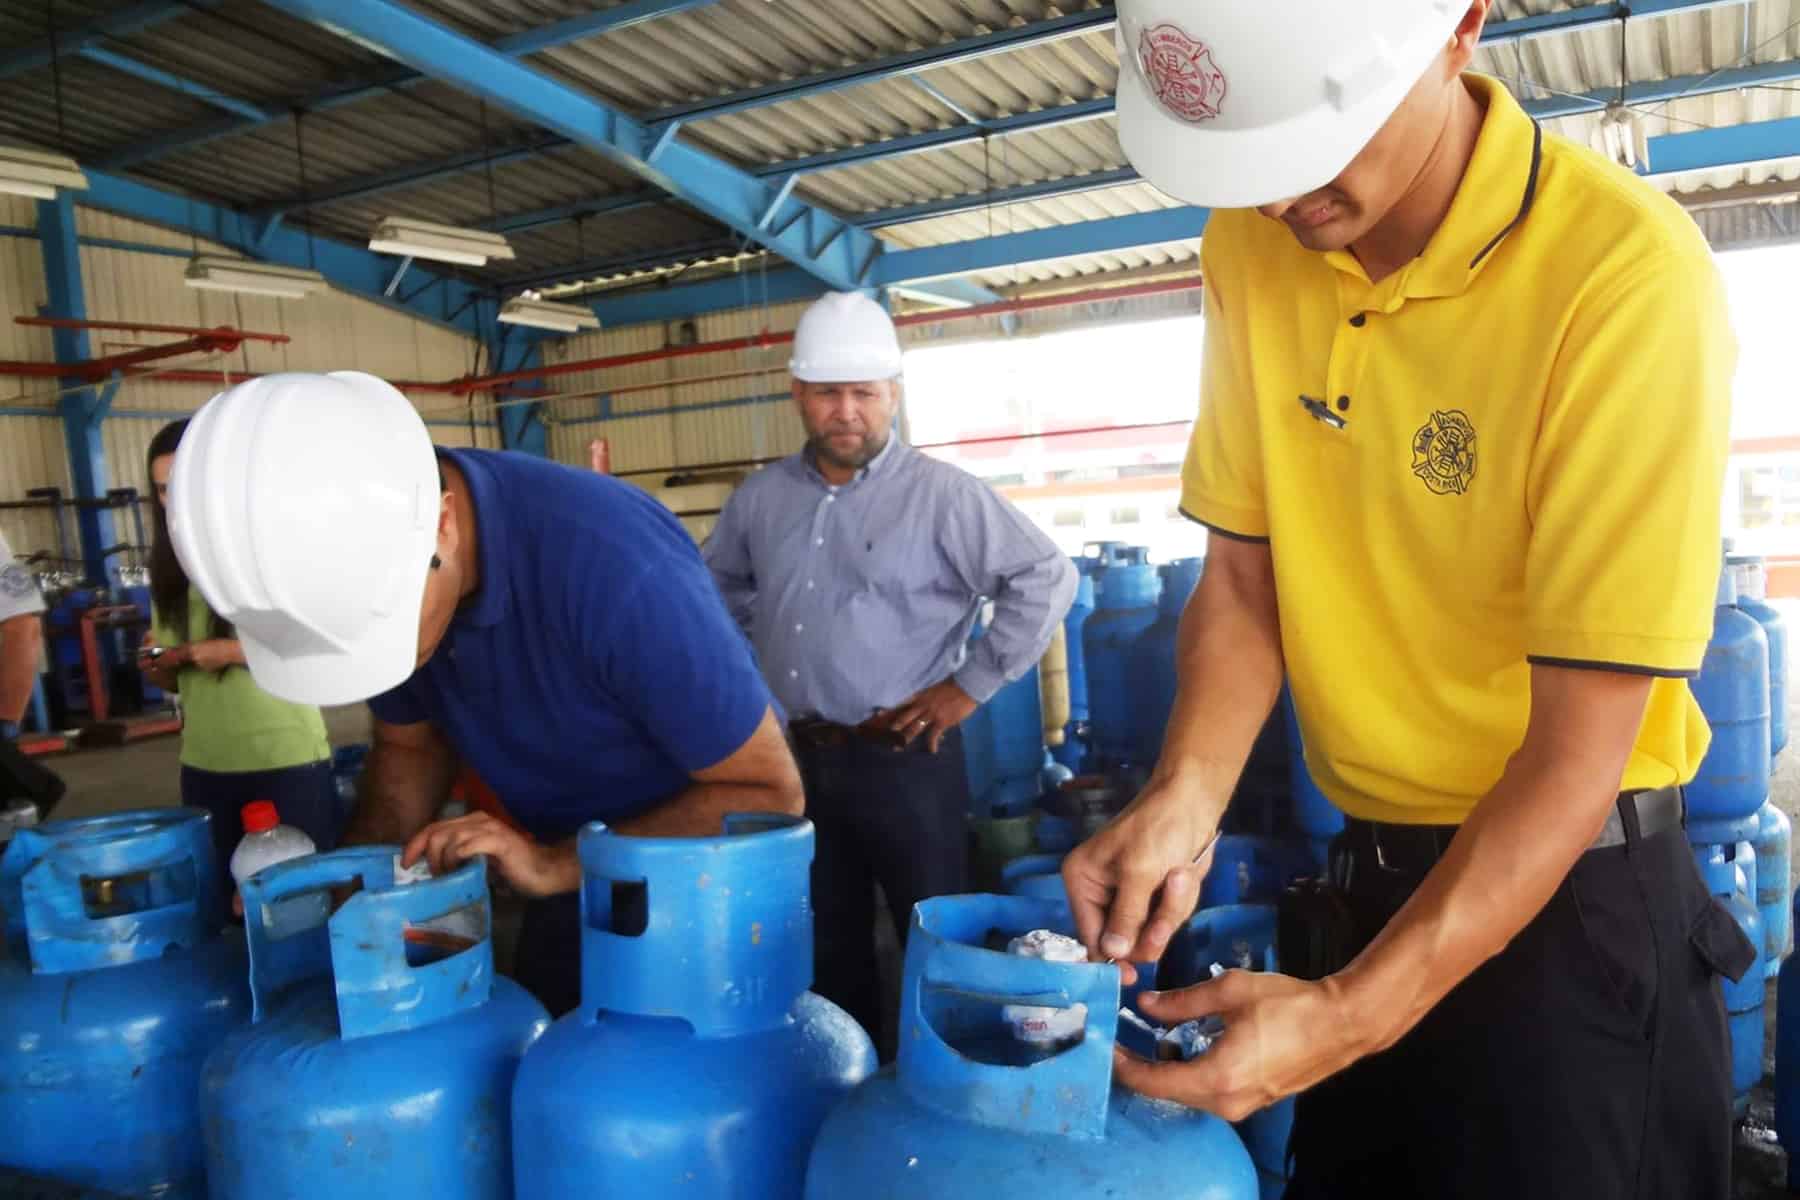 Inspection of propane cylinders